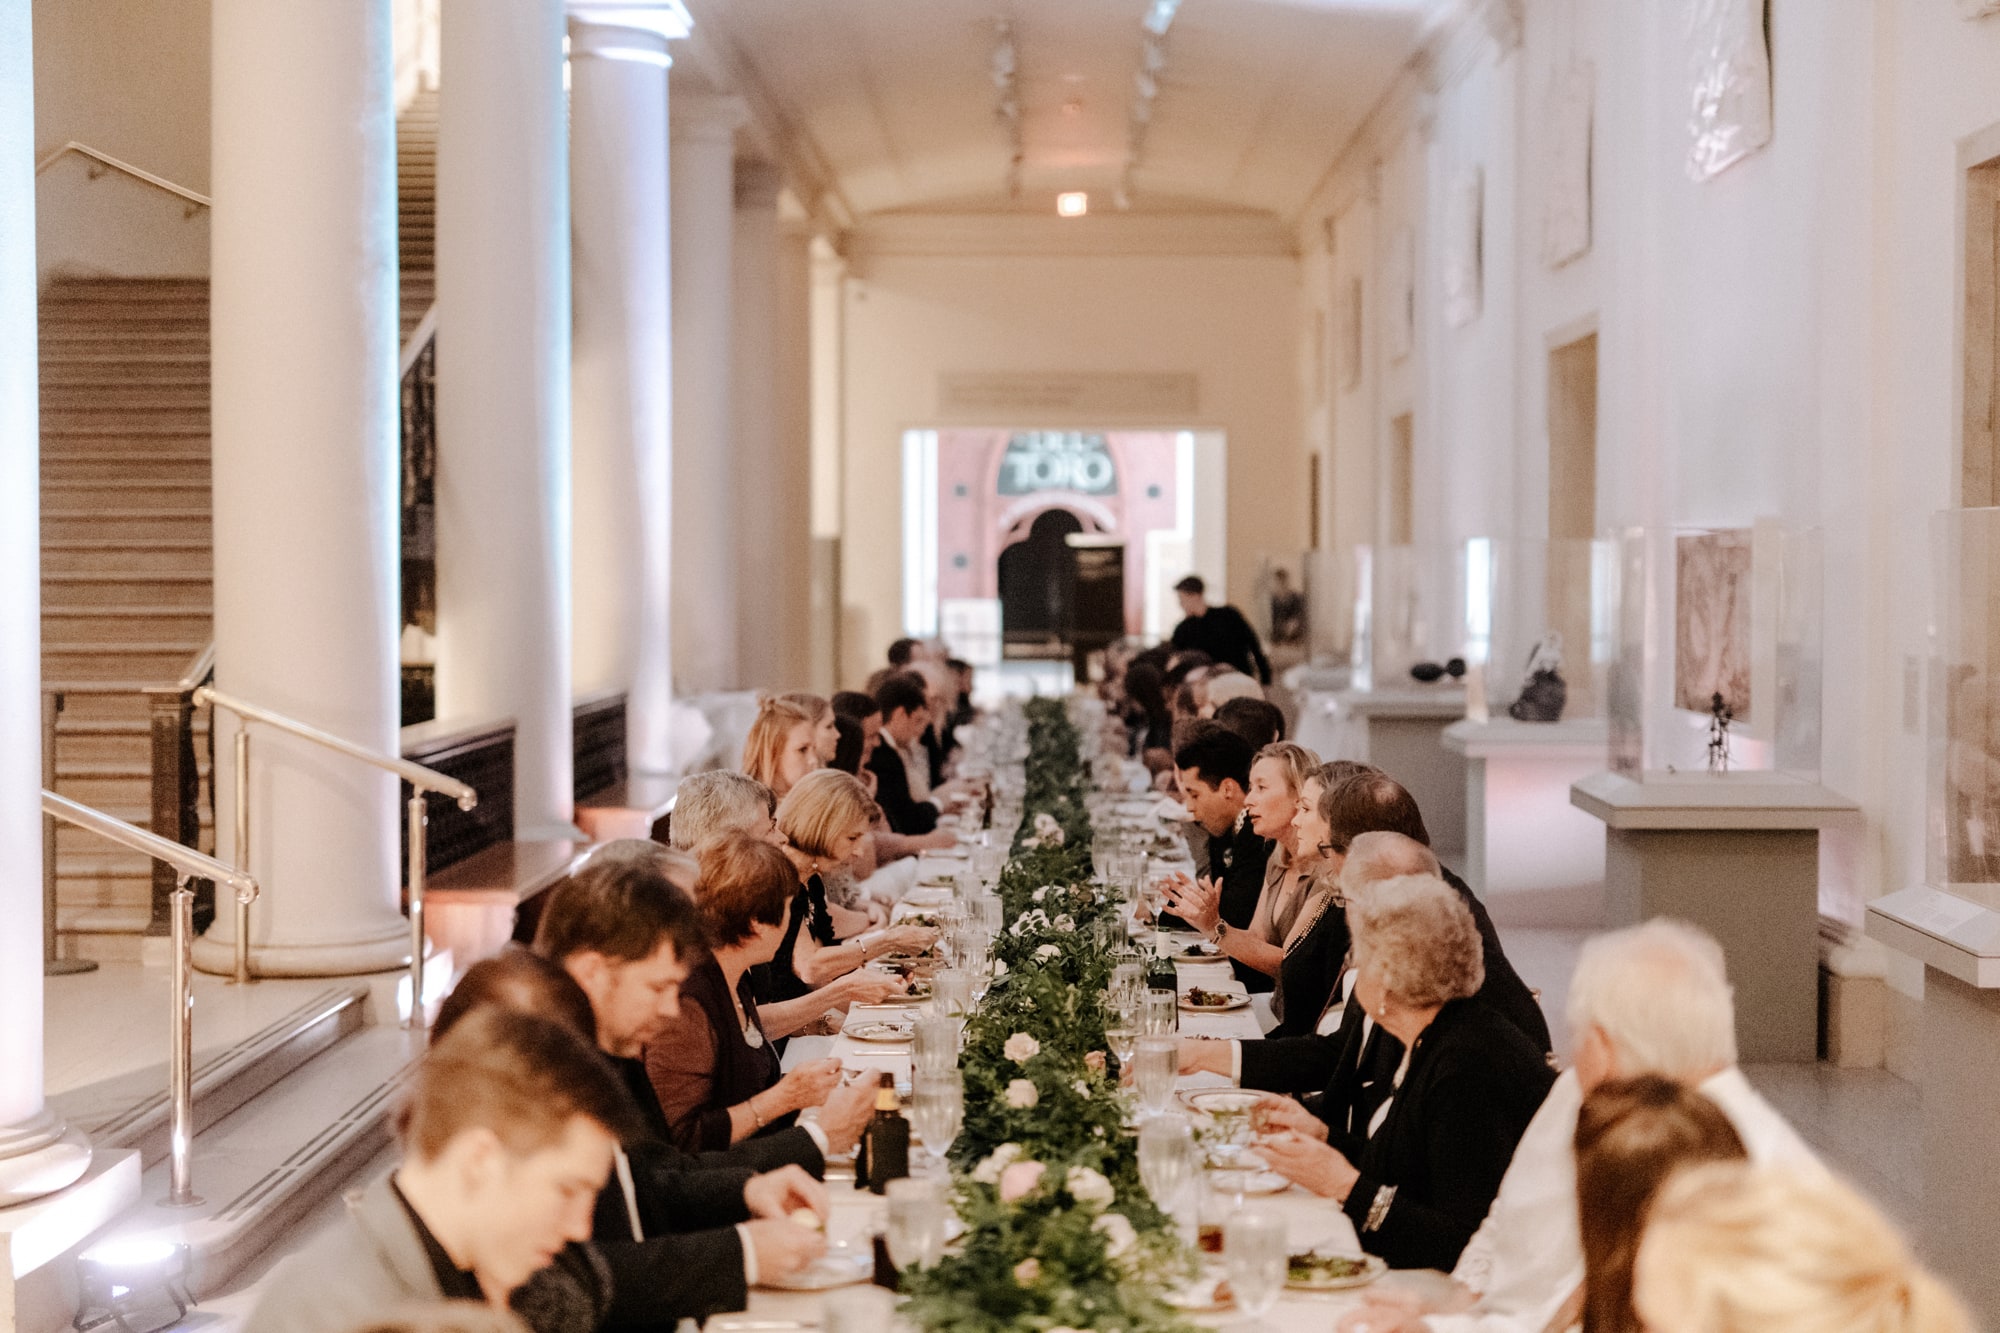 Guests enjoy a meal at a long, well-decorated table during a beautiful wedding inside the Minneapolis Institute of Art.